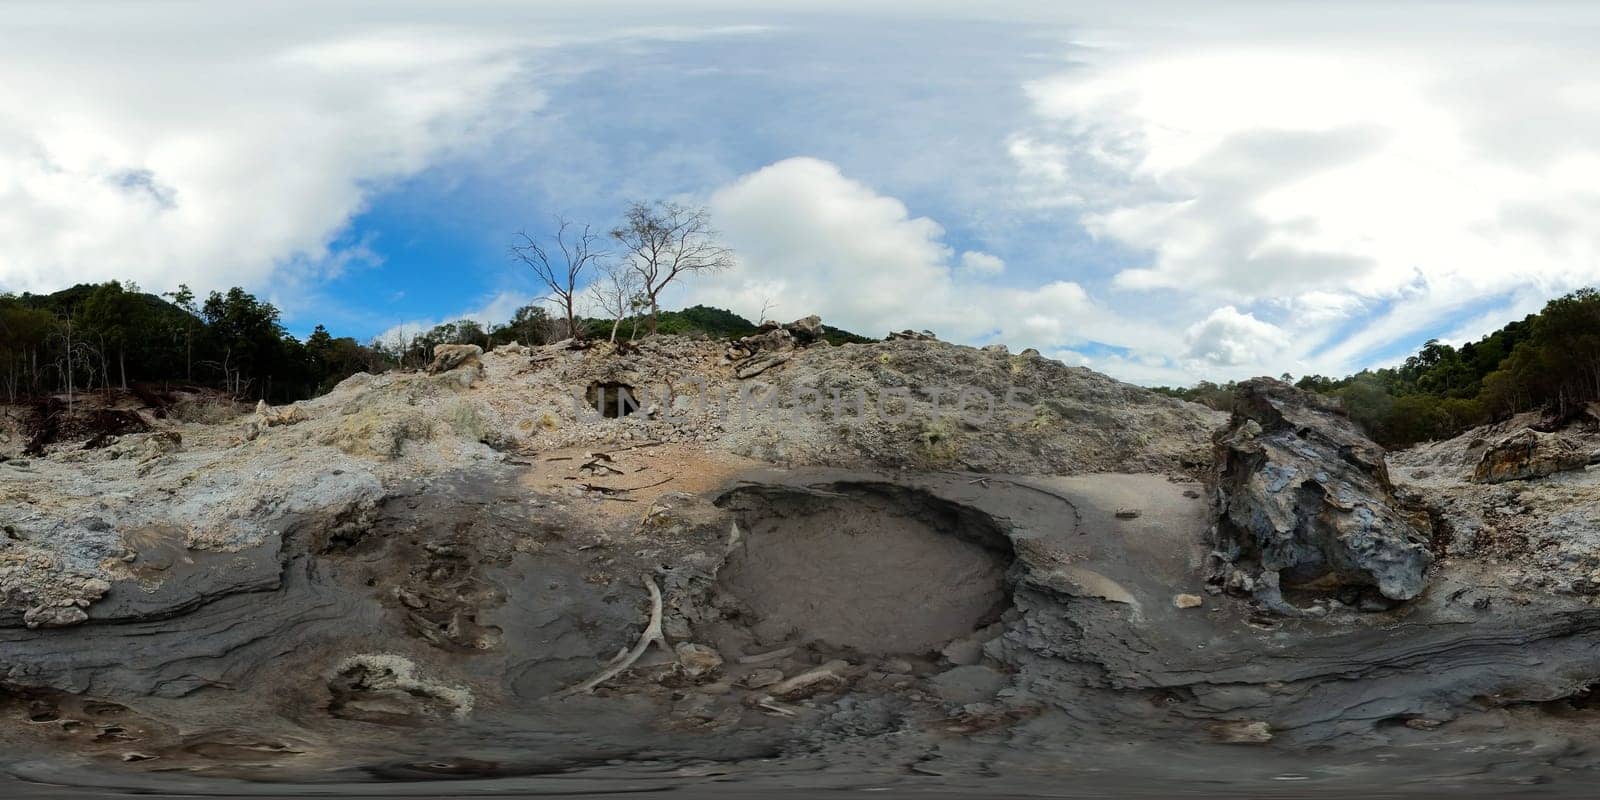 Mud geothermal springs and volcanic activity of fumaroles. Island We, Indonesia. VR 360.